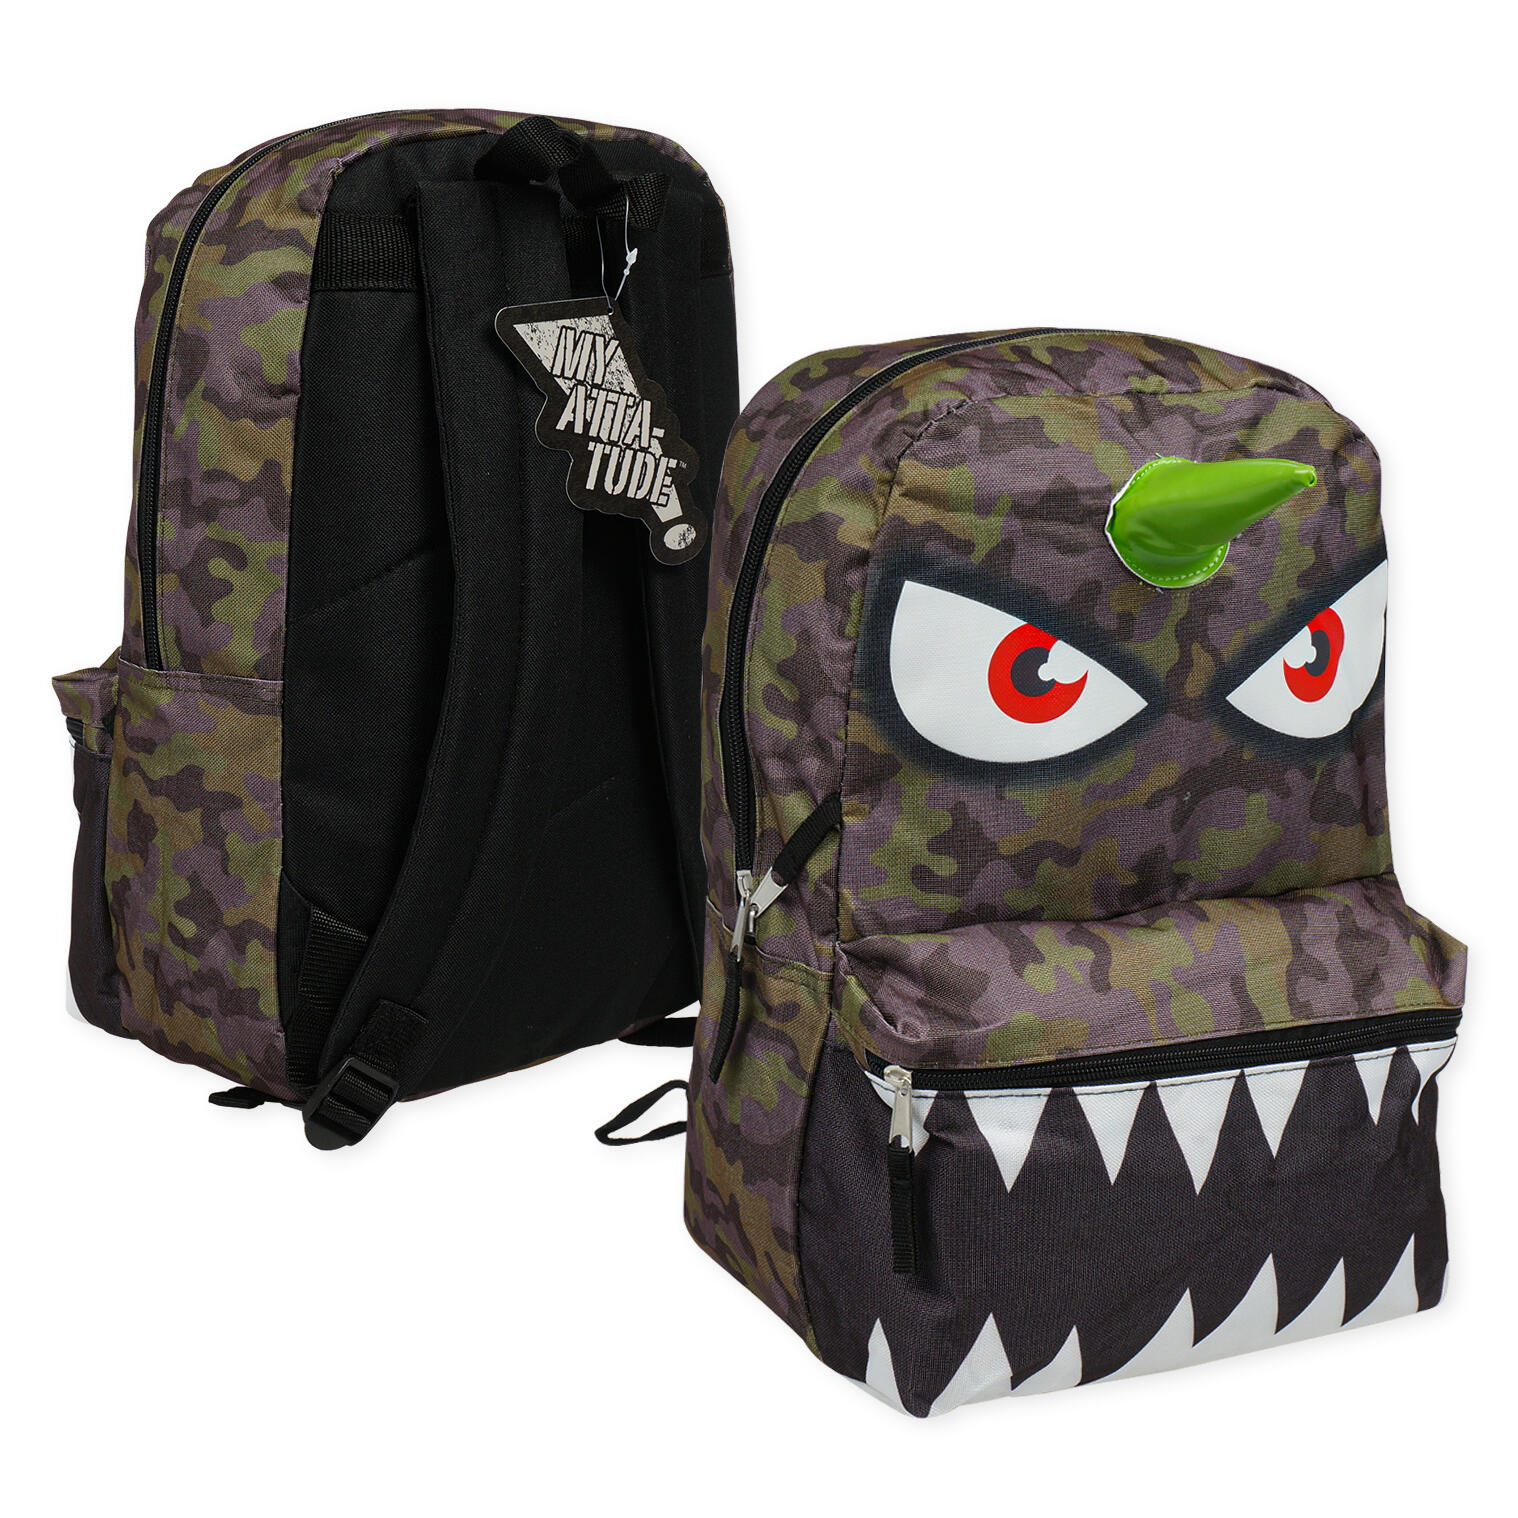 15" Monster Camo Backpack - image 1 of 1